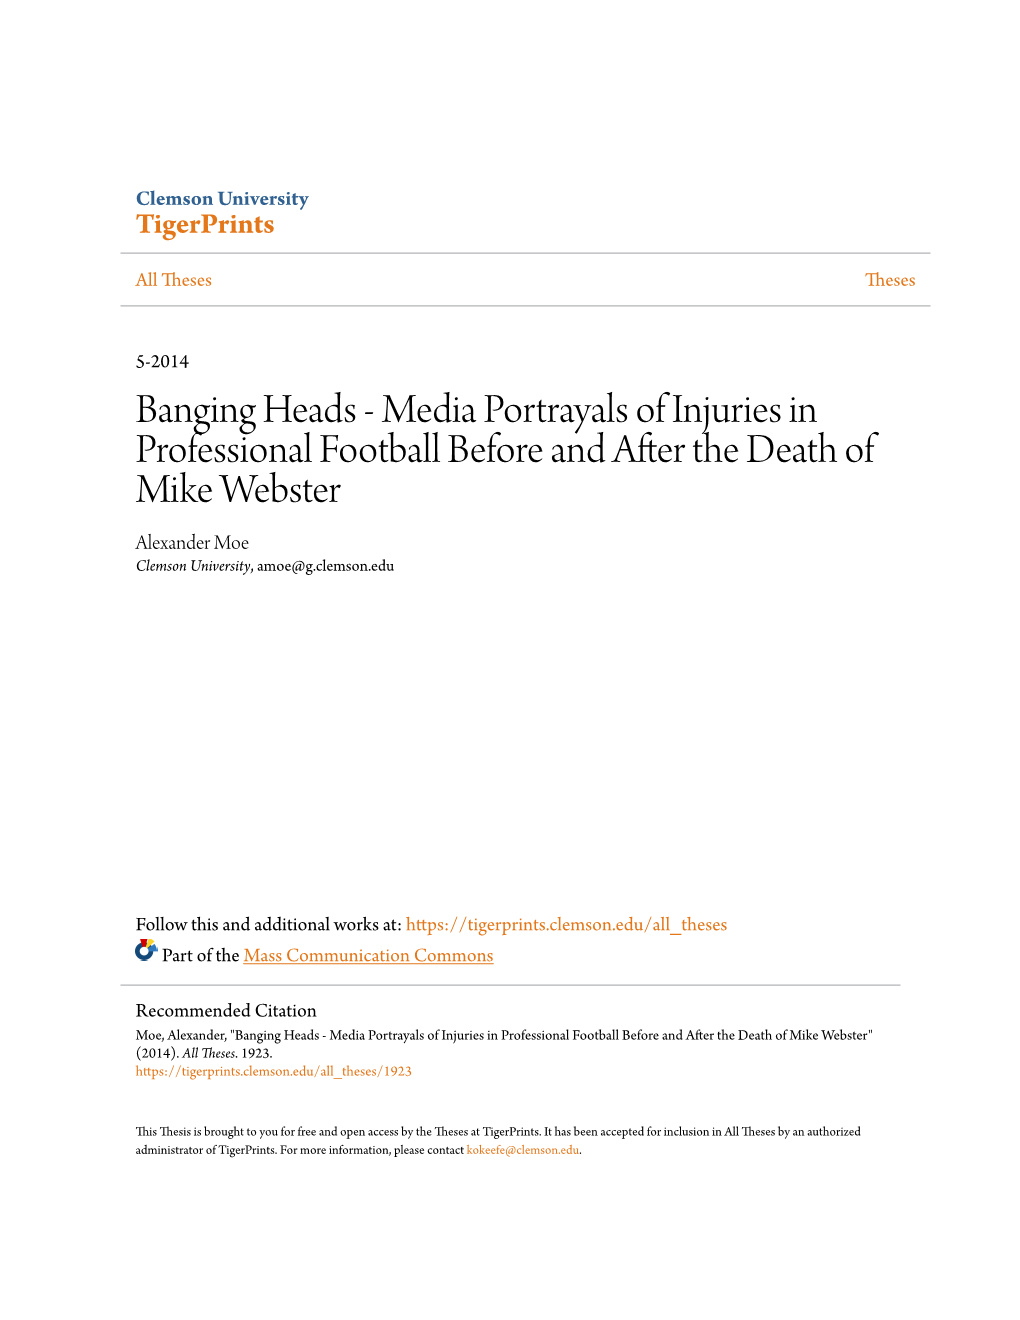 Banging Heads - Media Portrayals of Injuries in Professional Football Before and After the Death of Mike Webster Alexander Moe Clemson University, Amoe@G.Clemson.Edu